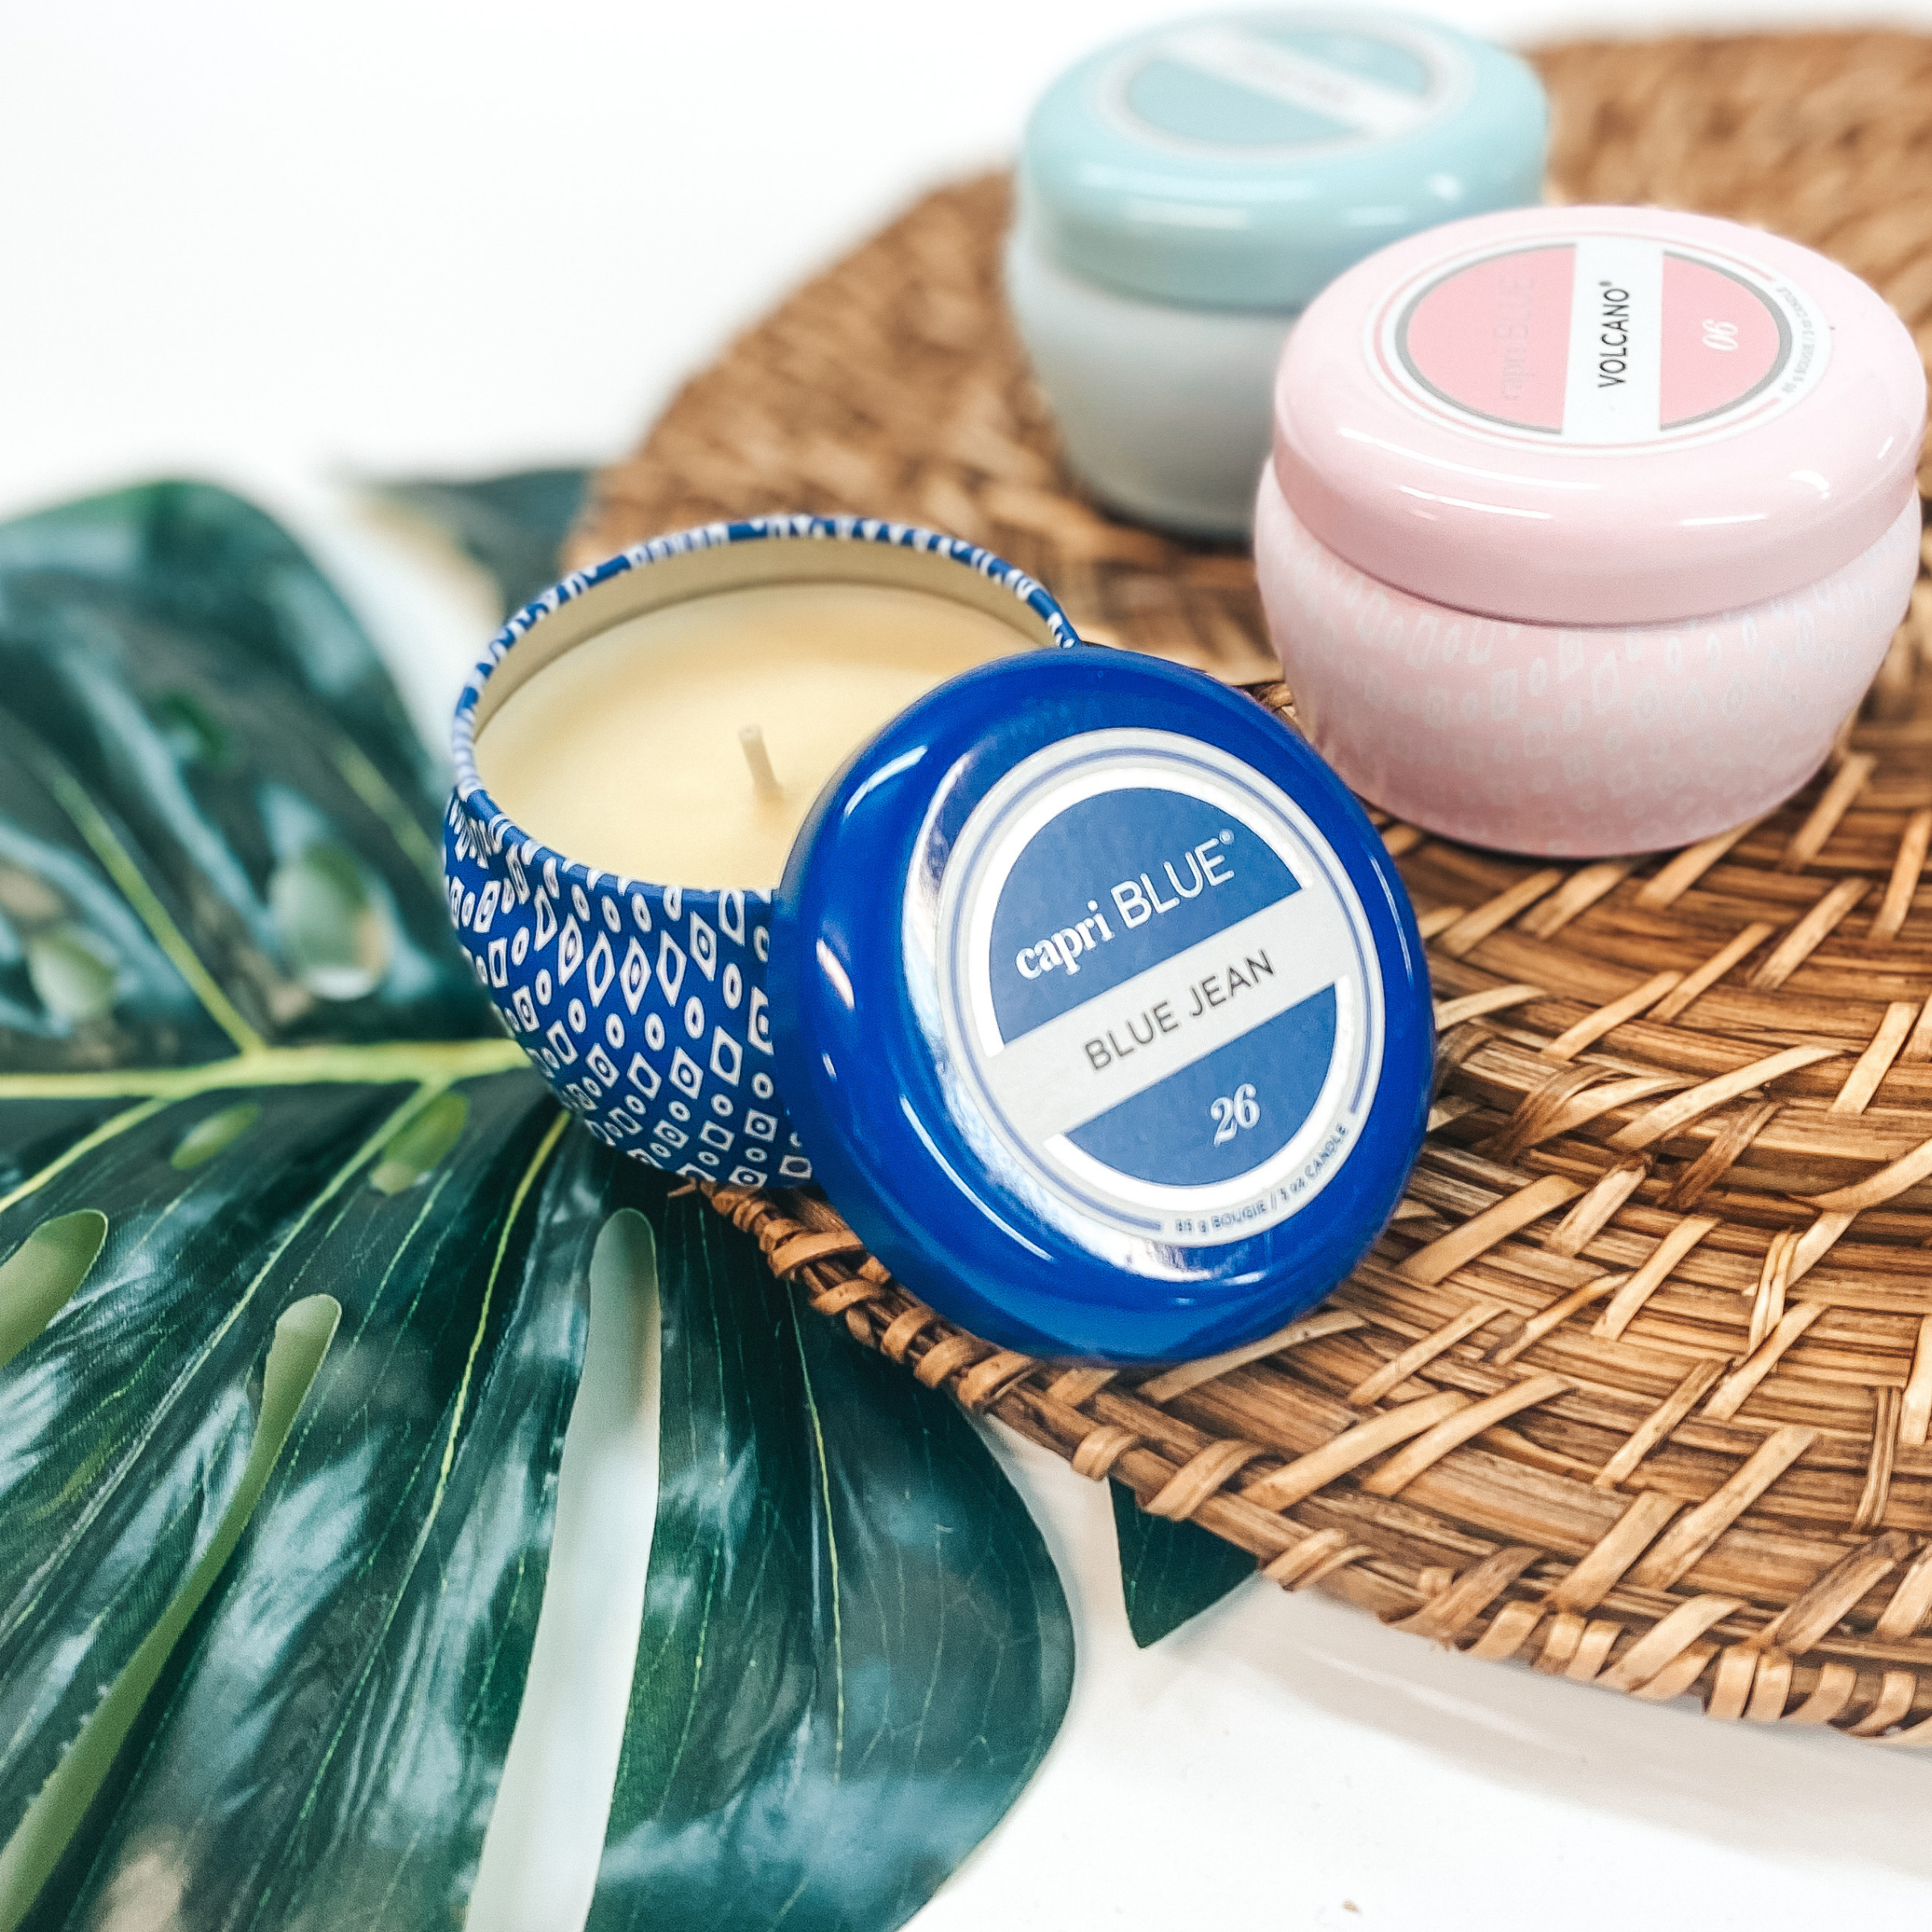 Capri Blue | 3 oz. Mini Tin Candle in Signature Blue | Various Scents - Giddy Up Glamour Boutique